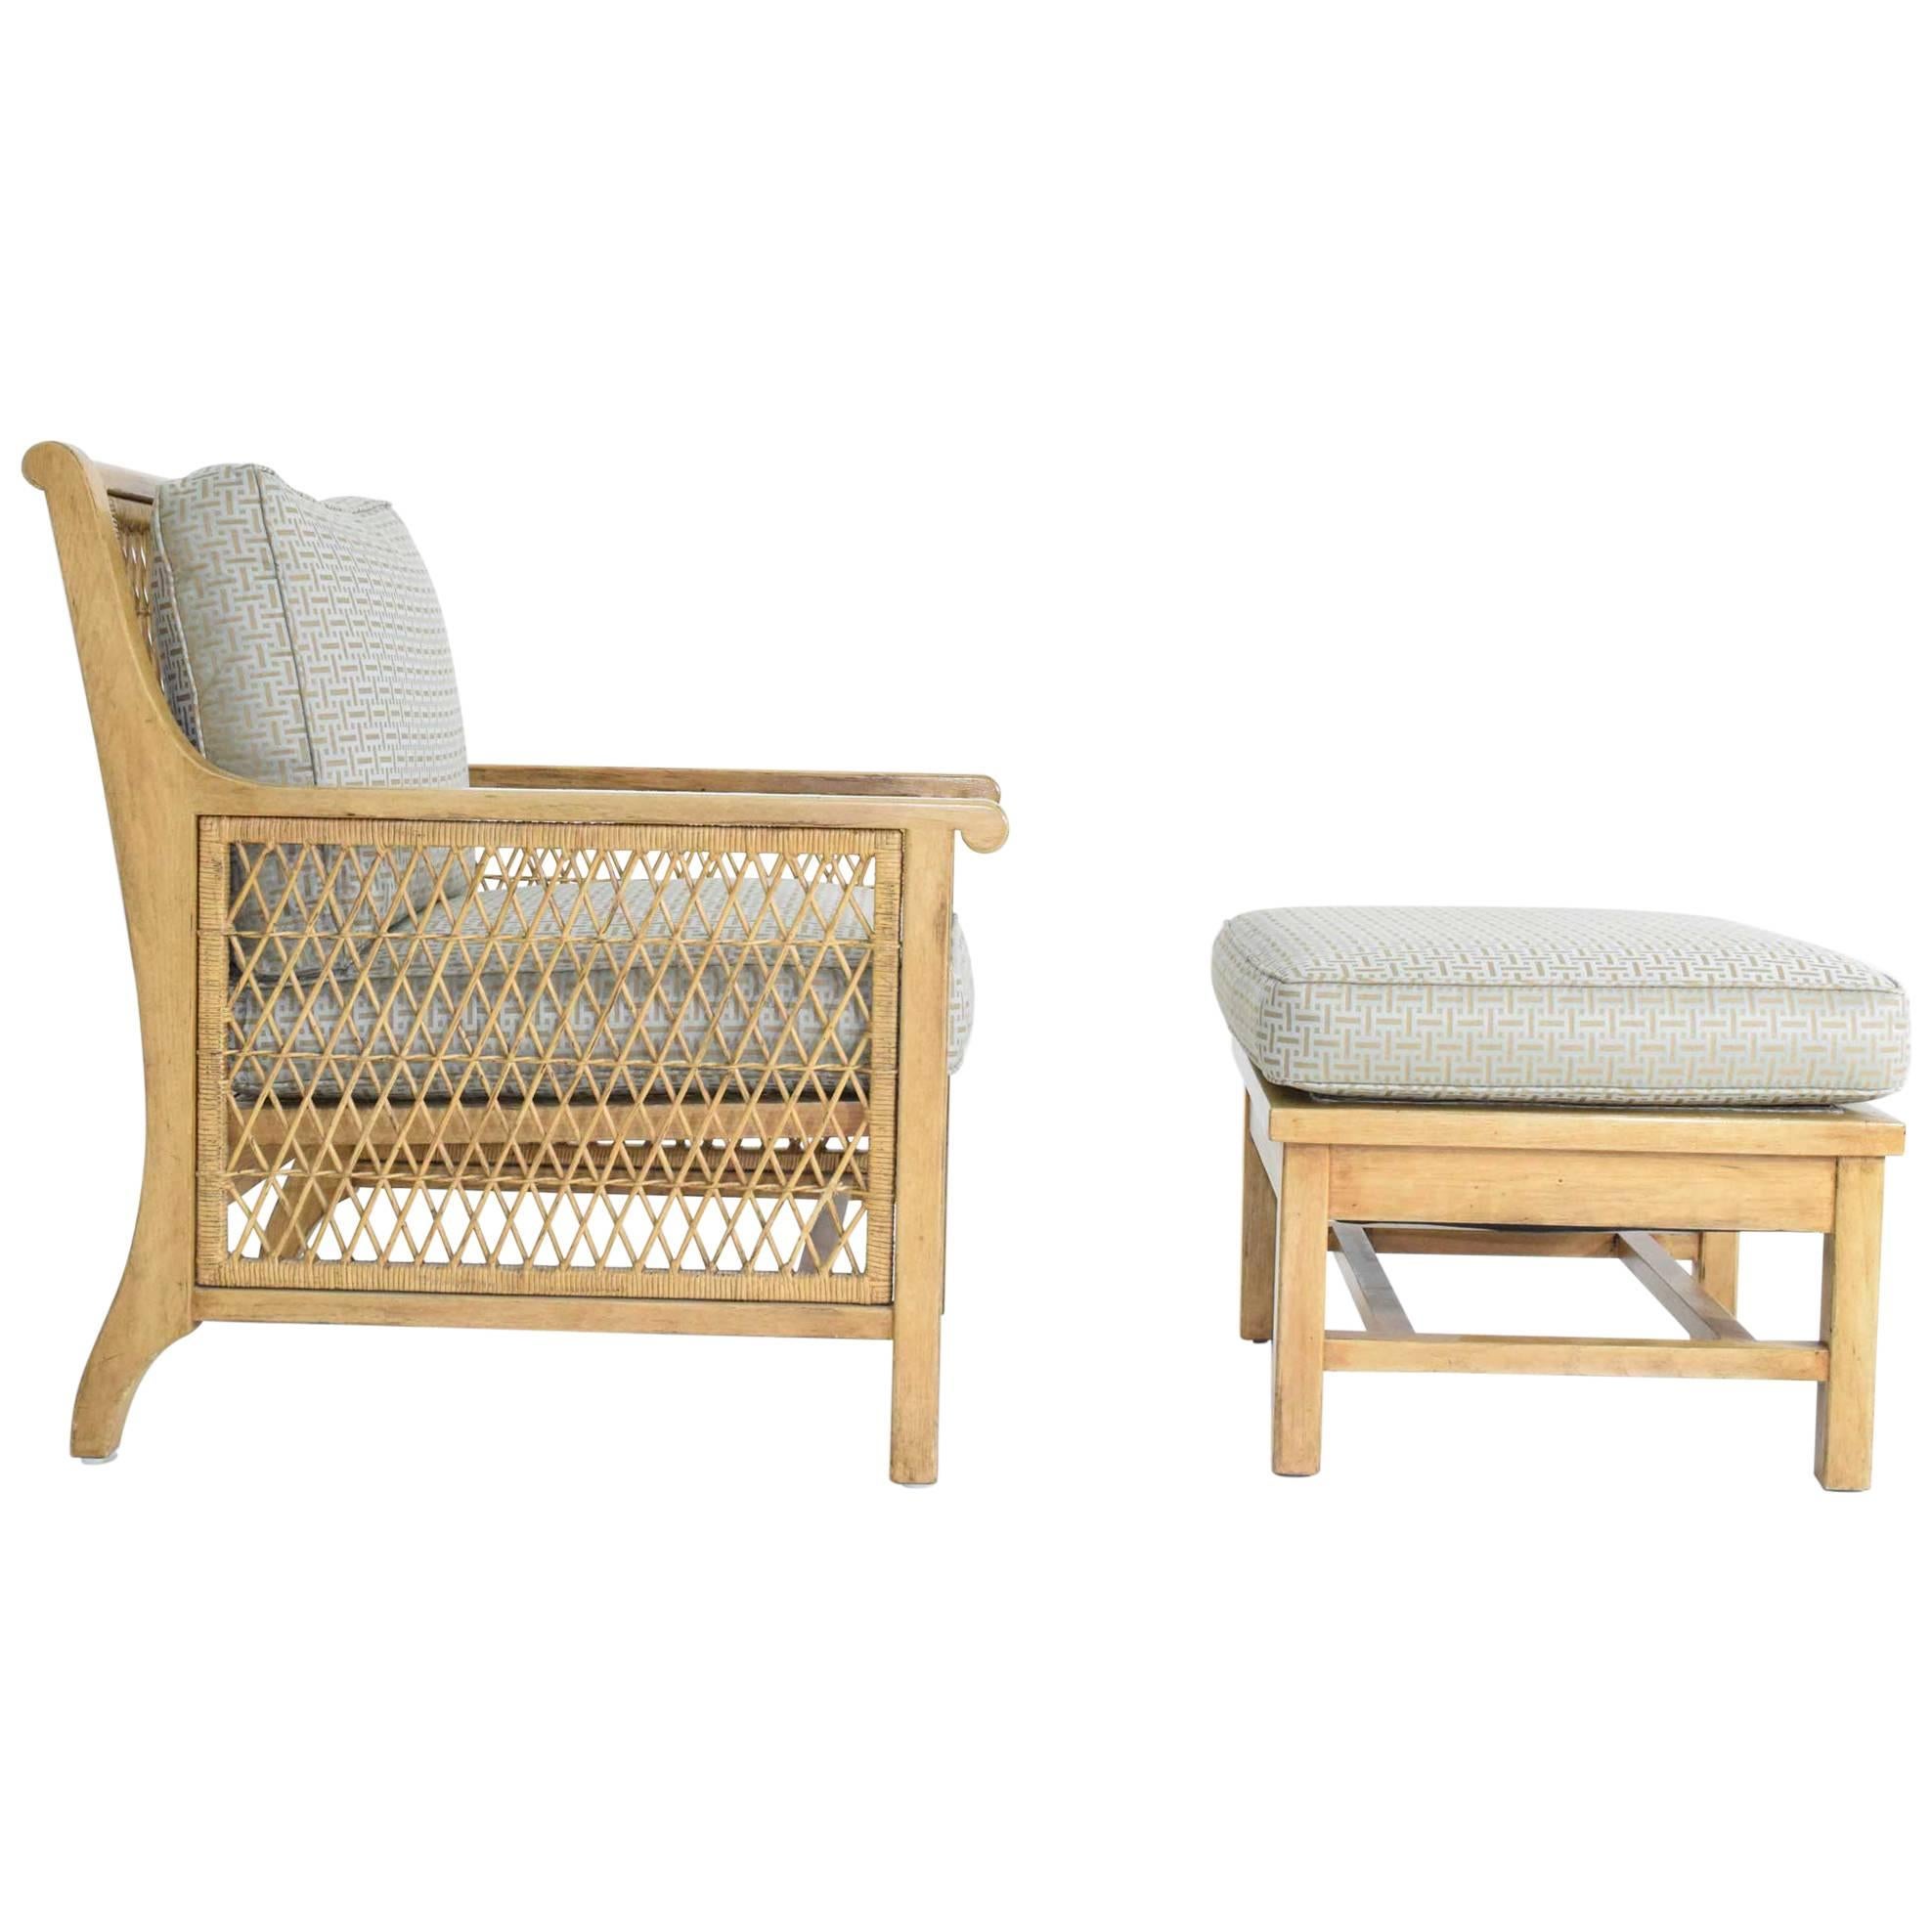 Oak and Wicker Lounge Chair with Ottoman